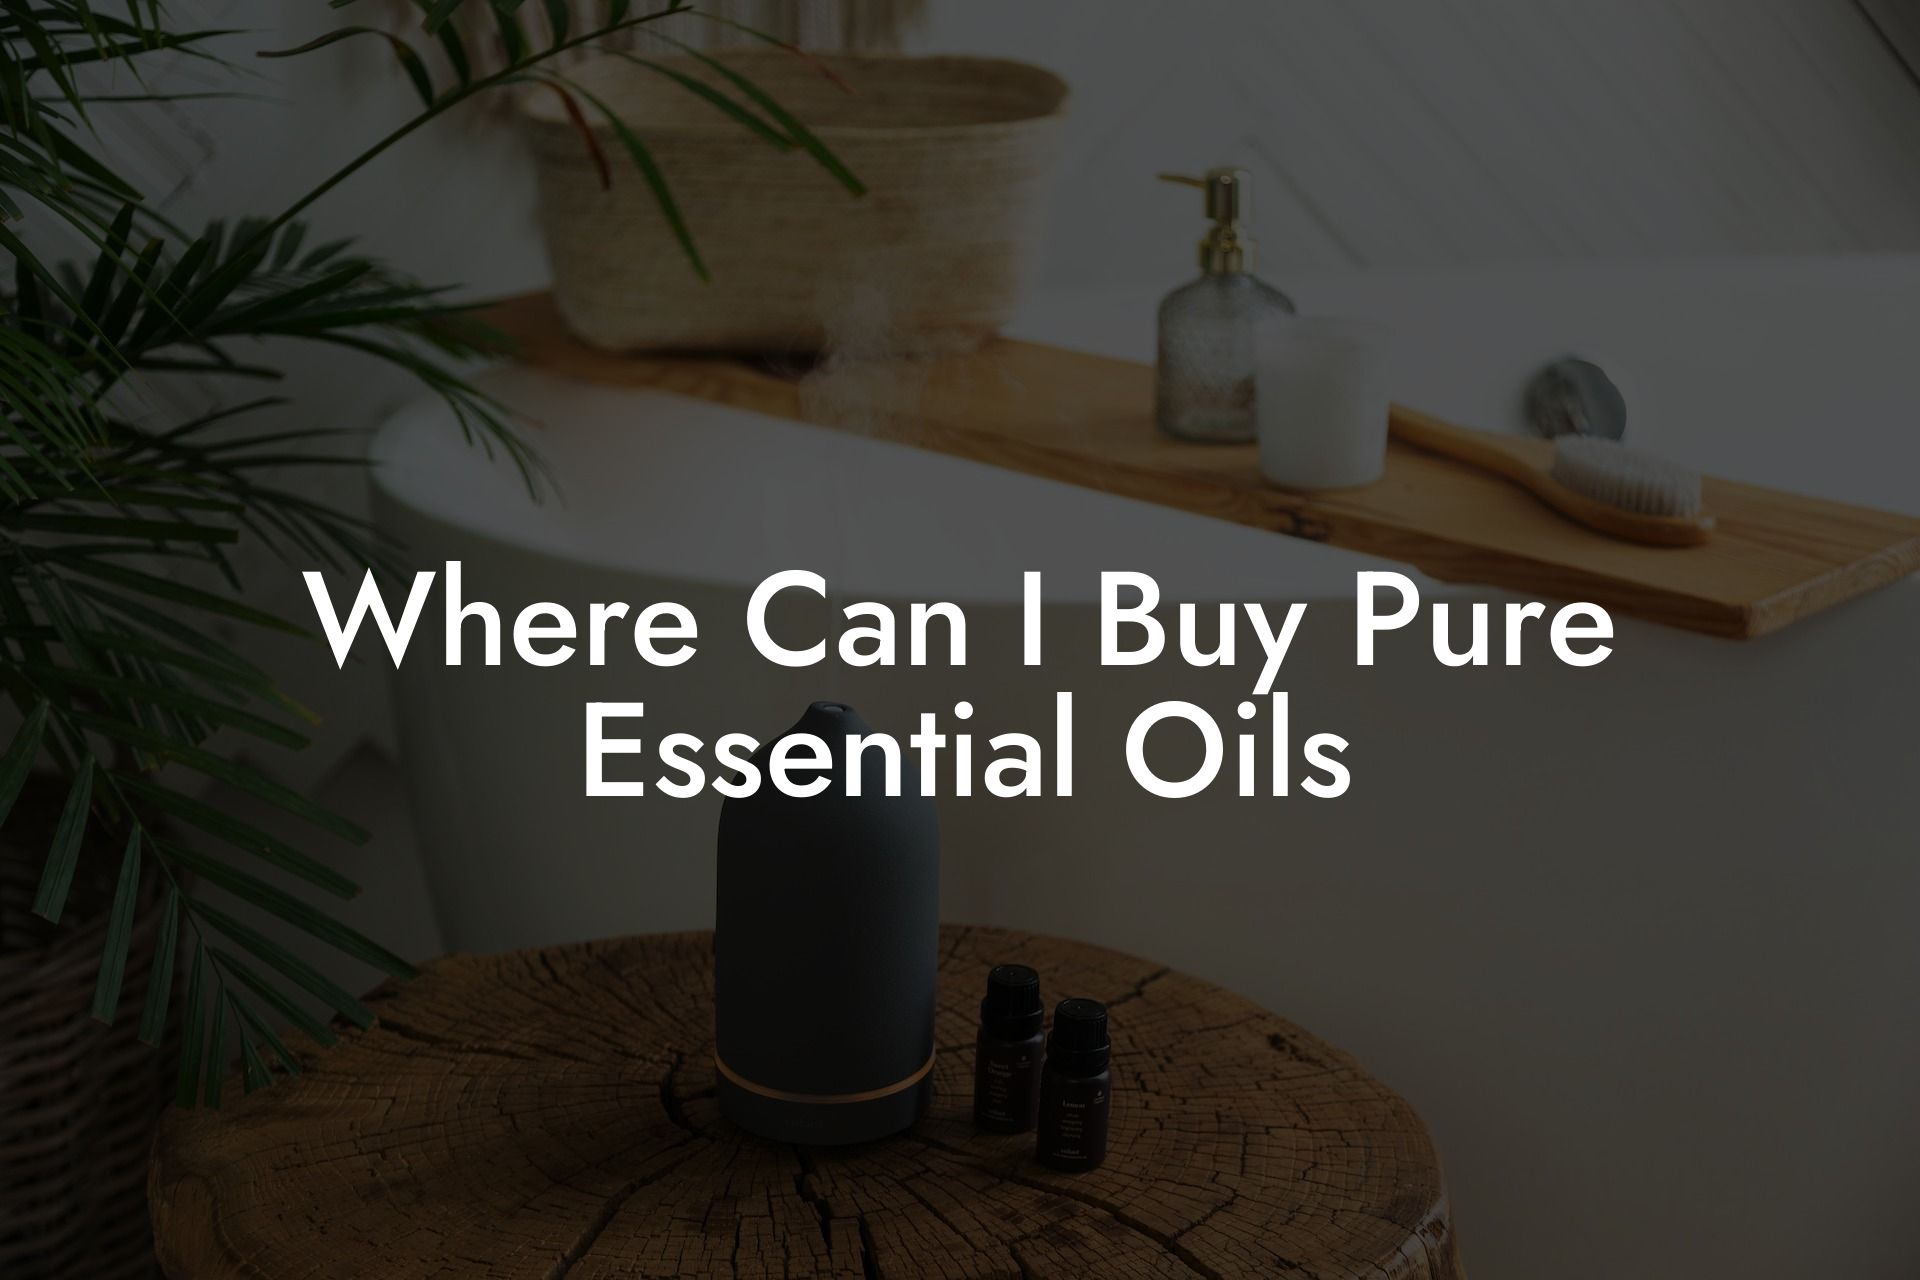 Where Can I Buy Pure Essential Oils